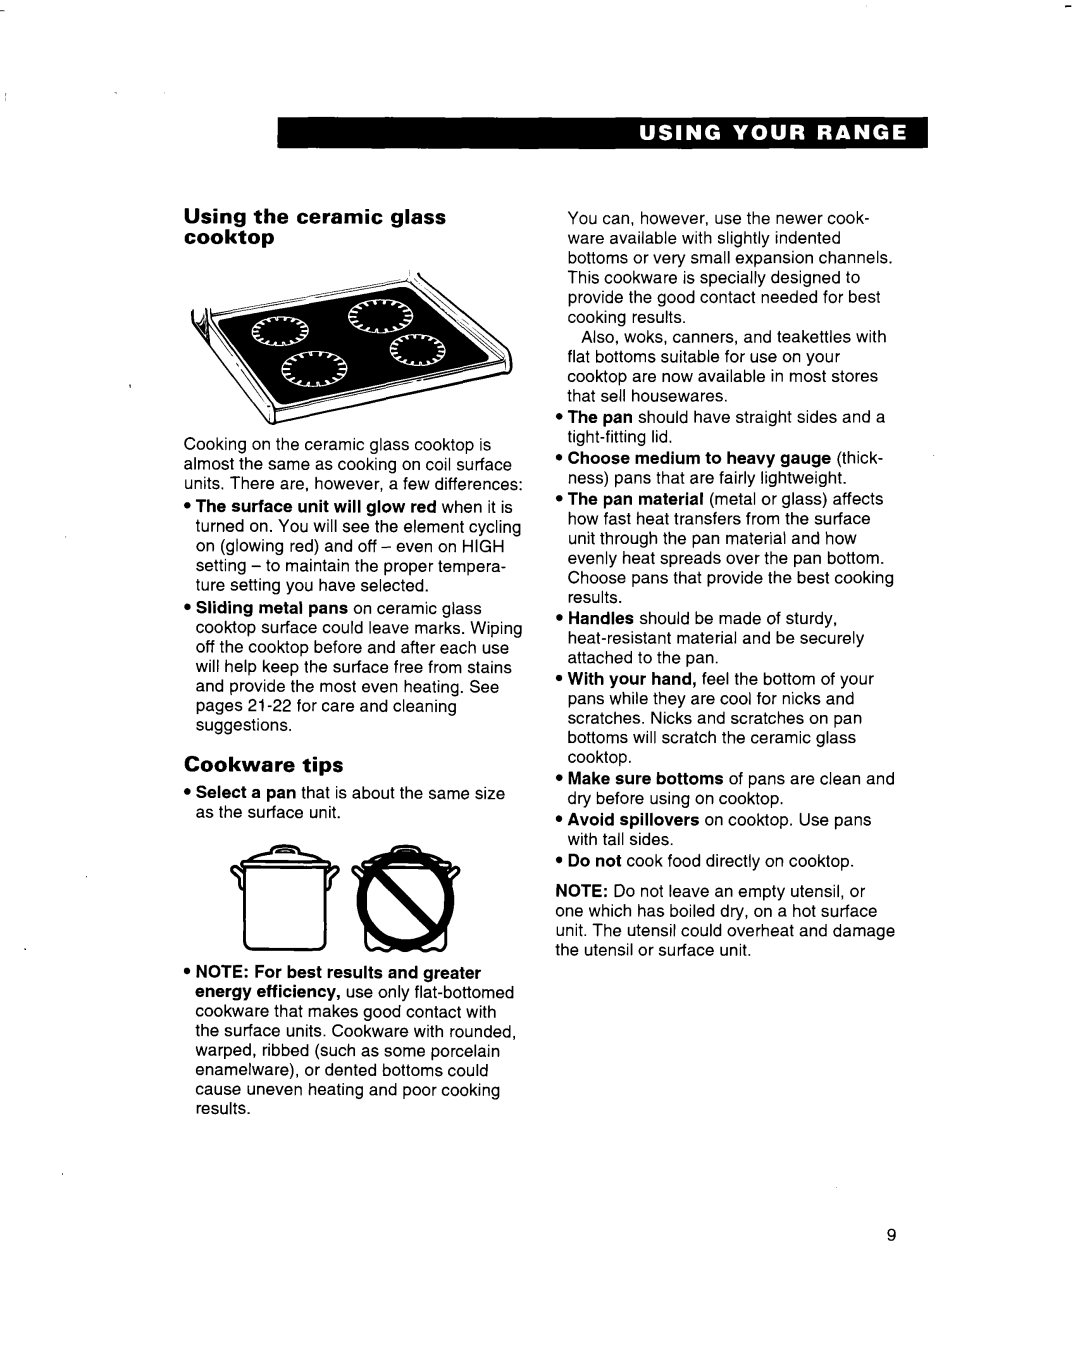 Whirlpool RF314BBD manual Using the ceramic glass cooktop, Cookware tips 